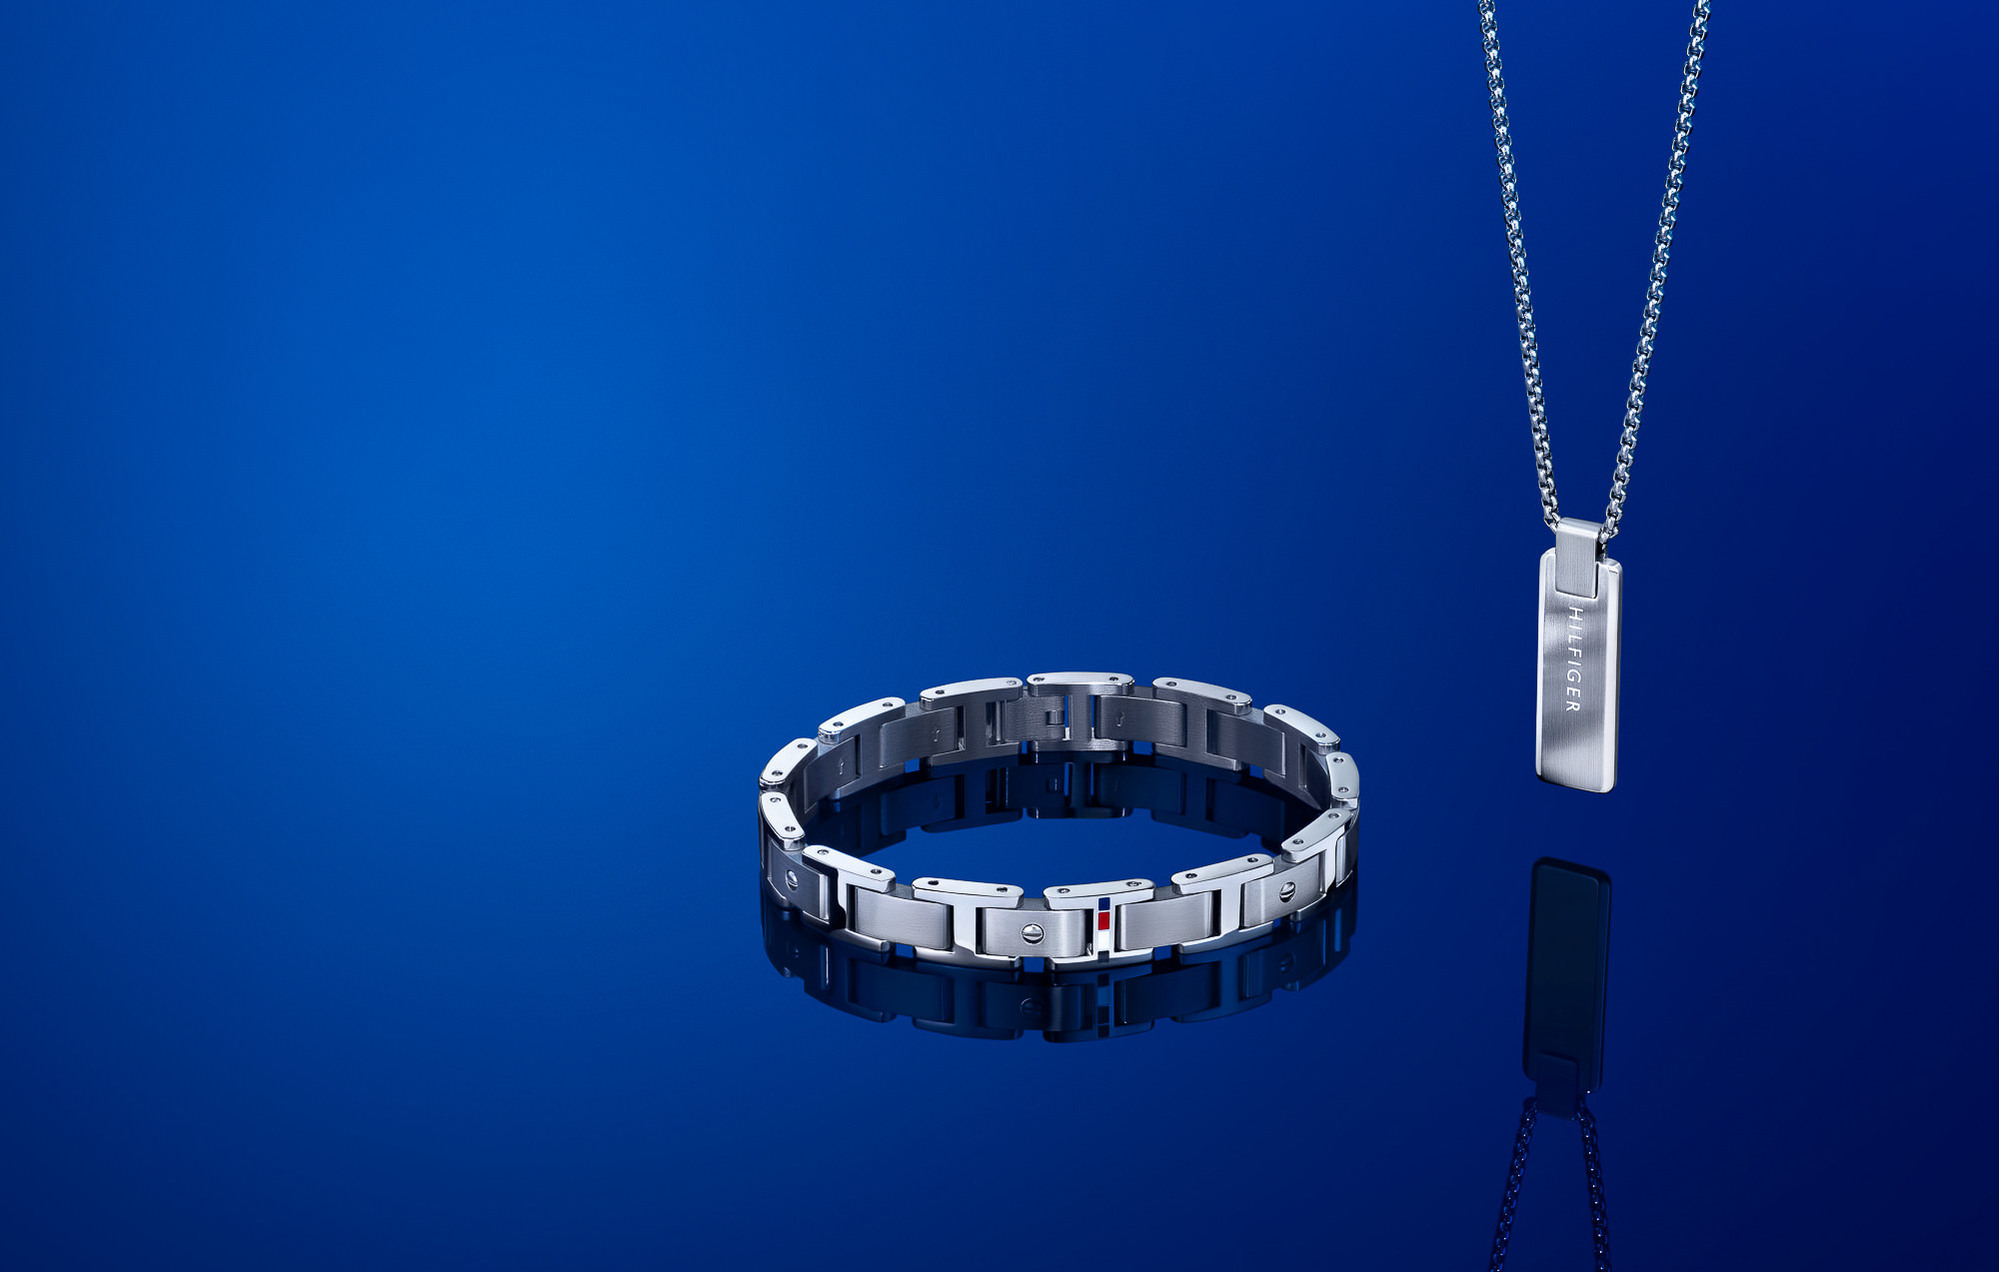 Tommy Hilfiger jewelry photography by commercial product & advertising photographer Timothy Hogan in the Los Angeles studio